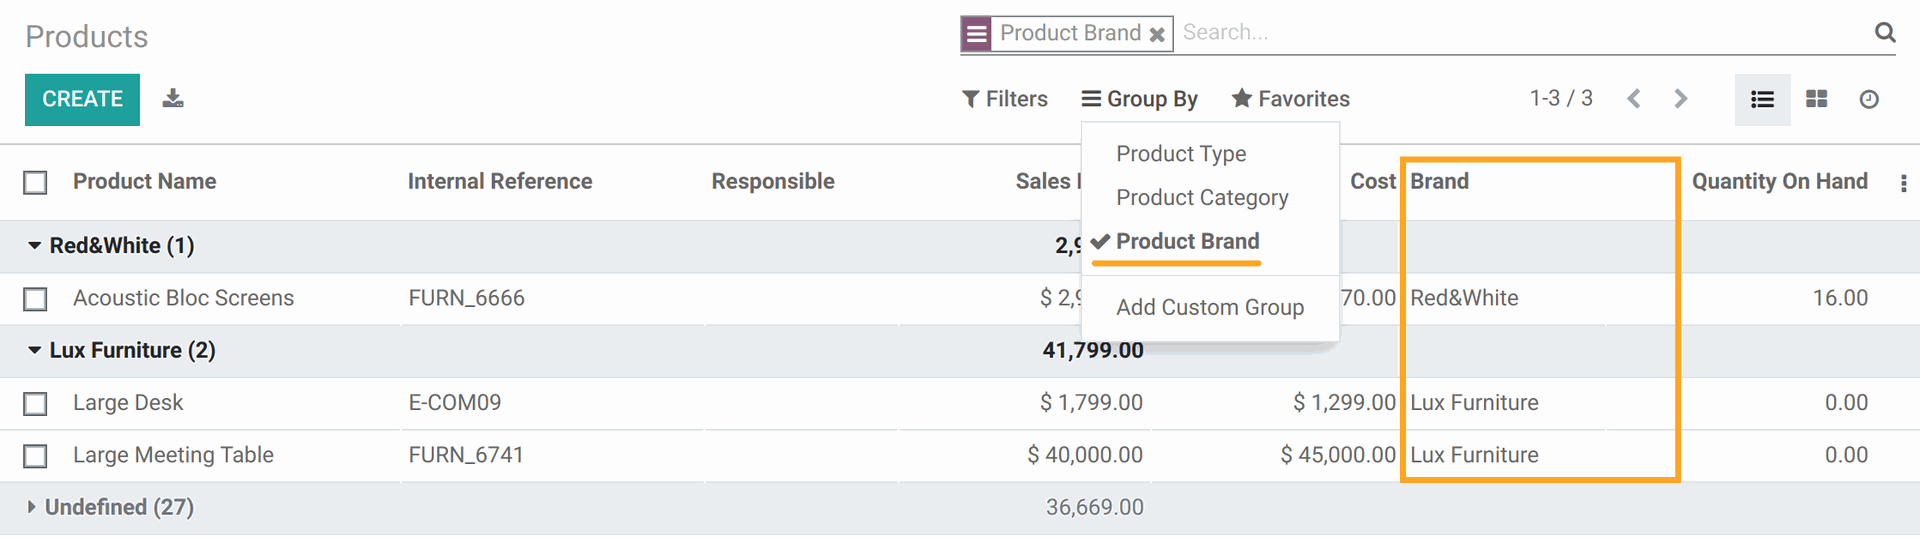 Odoo False Product Brands for Data Feeds group by